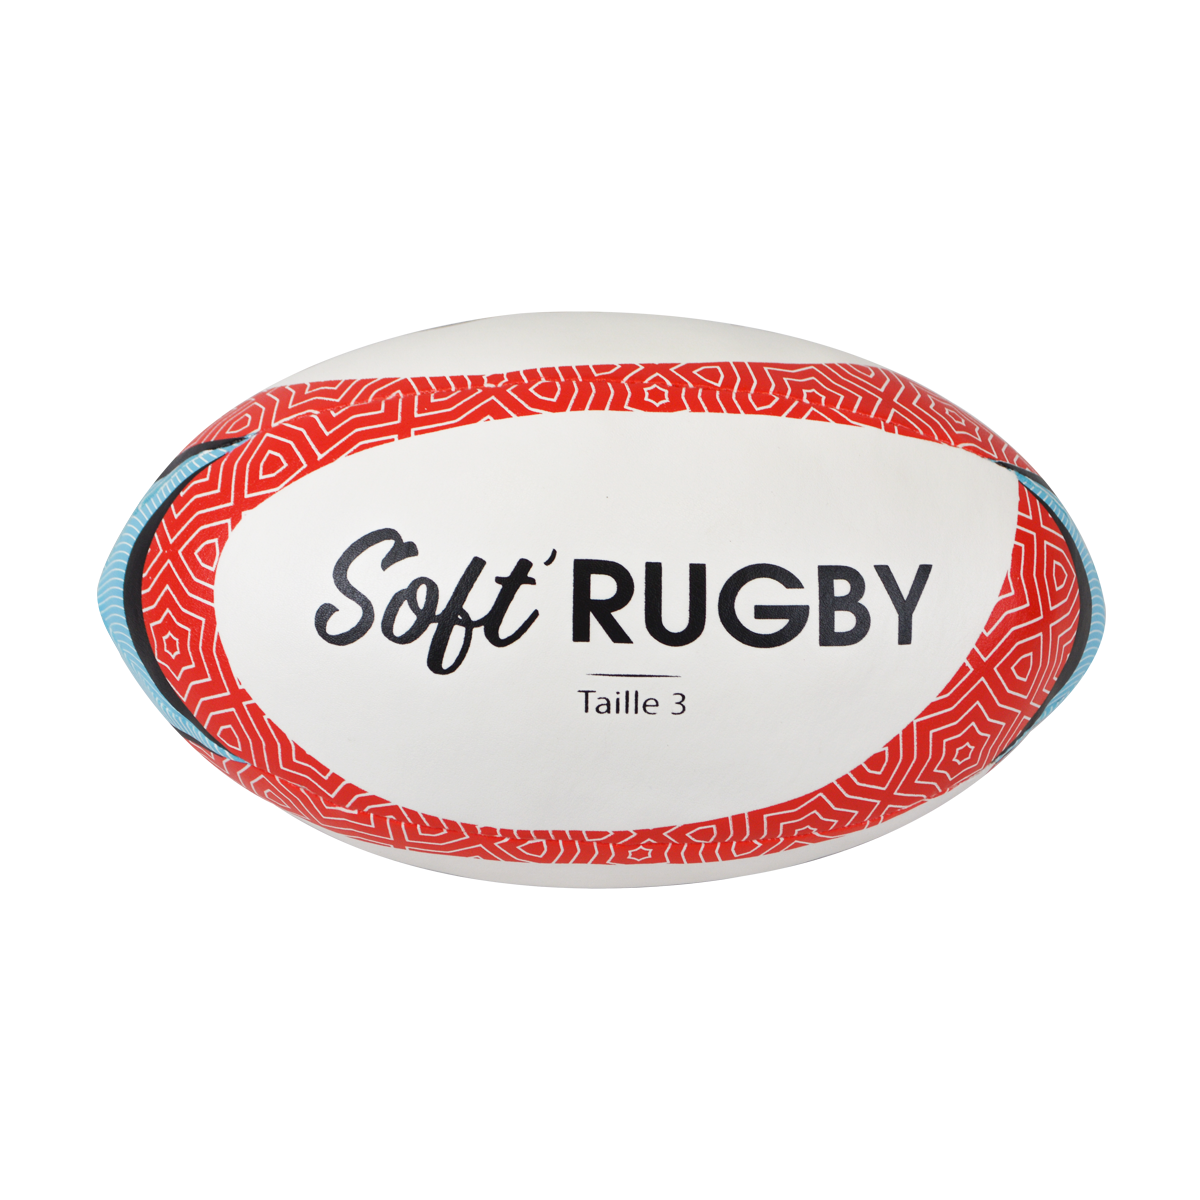 BALLON SOFT RUGBY TAILLE 3